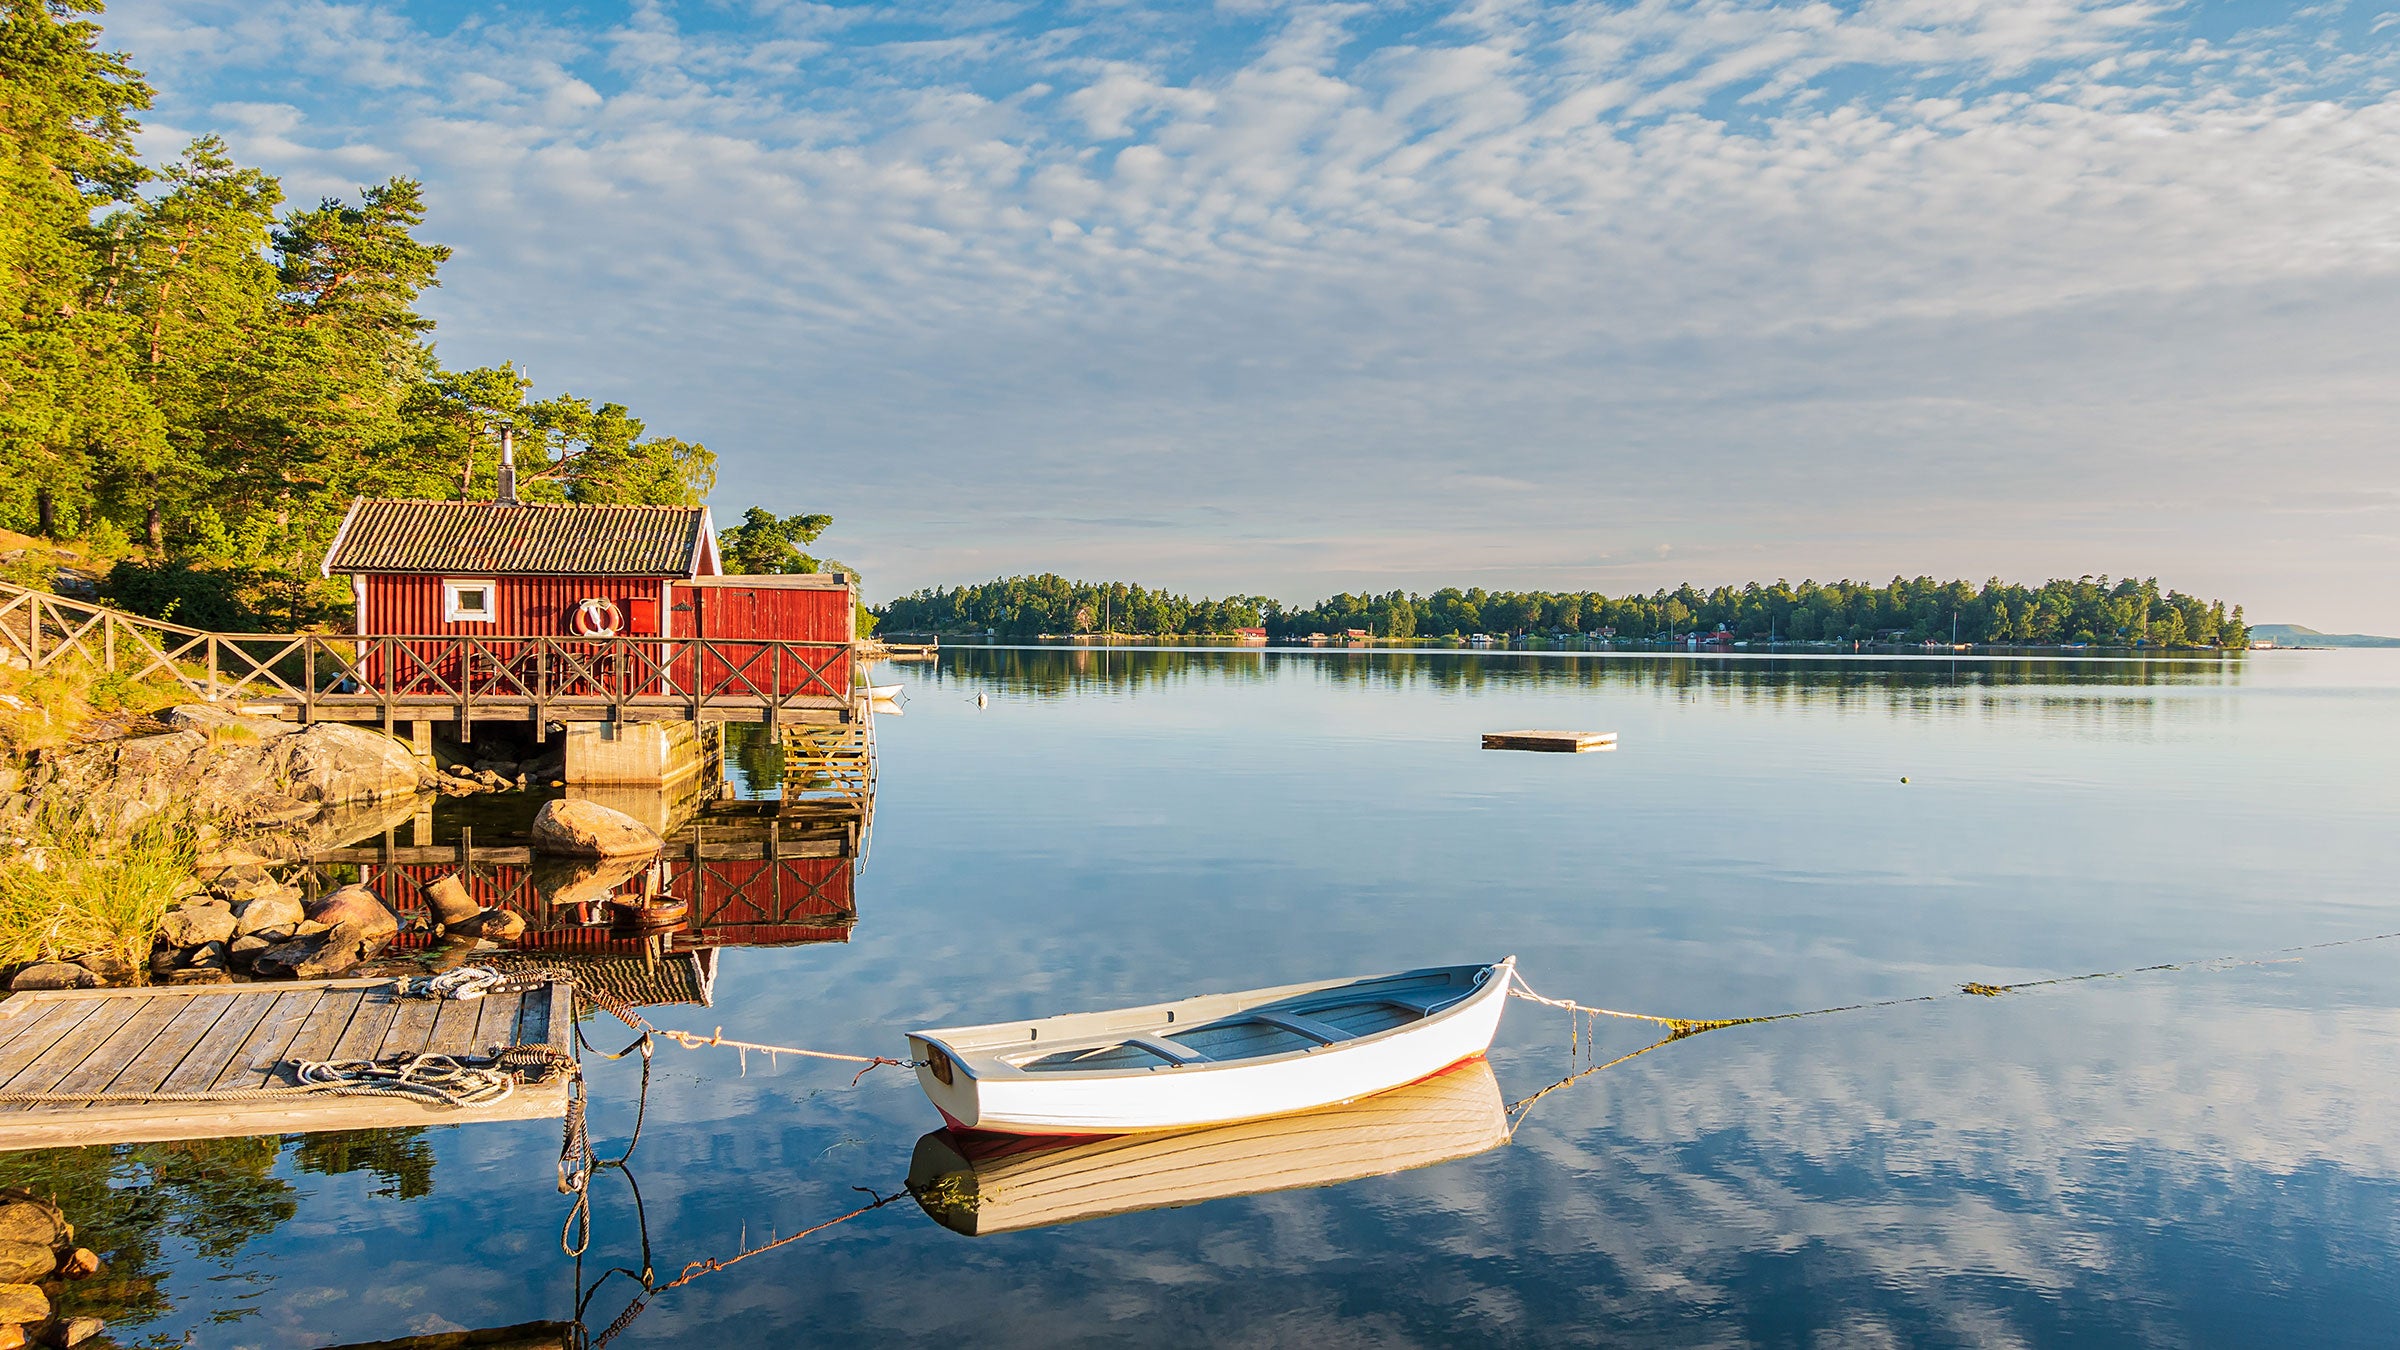 red house in sweden with a boat